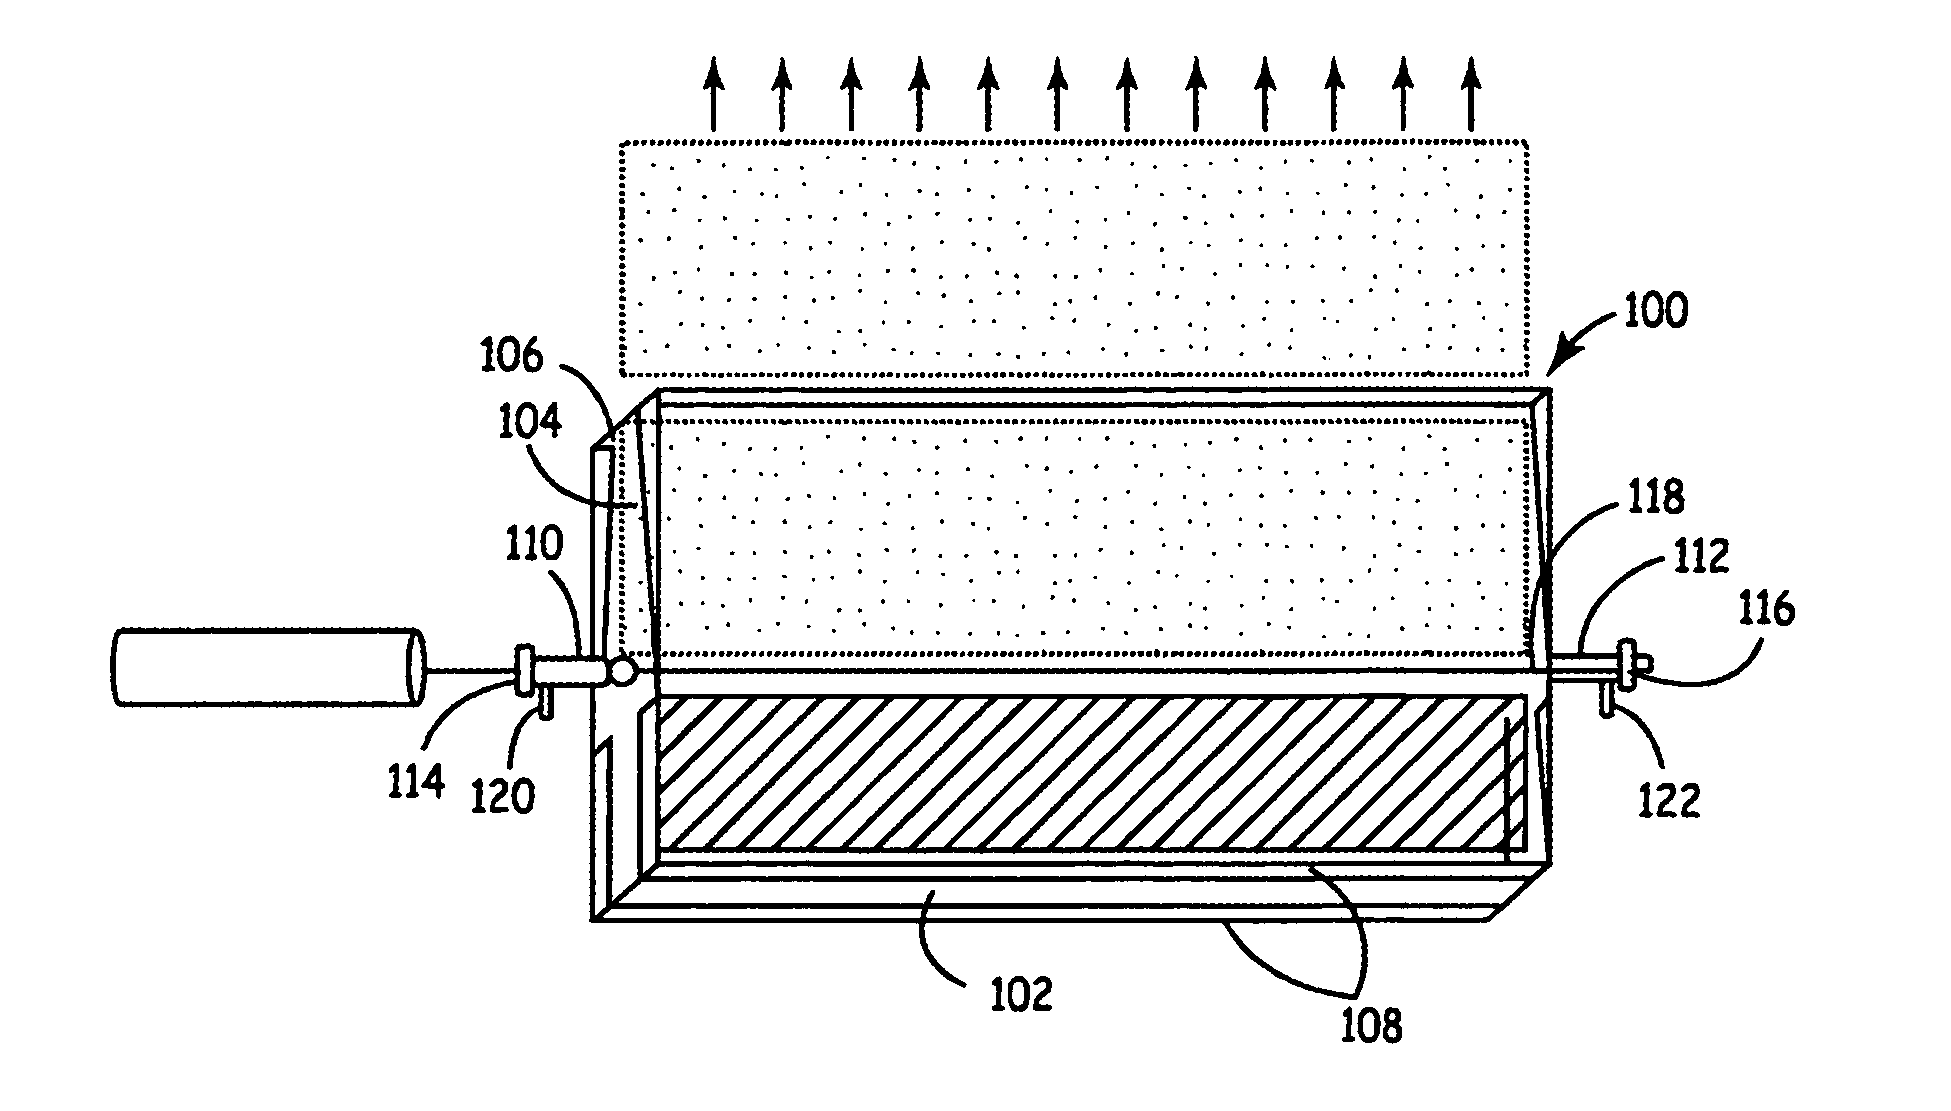 Reactive deposition for electrochemical cell production